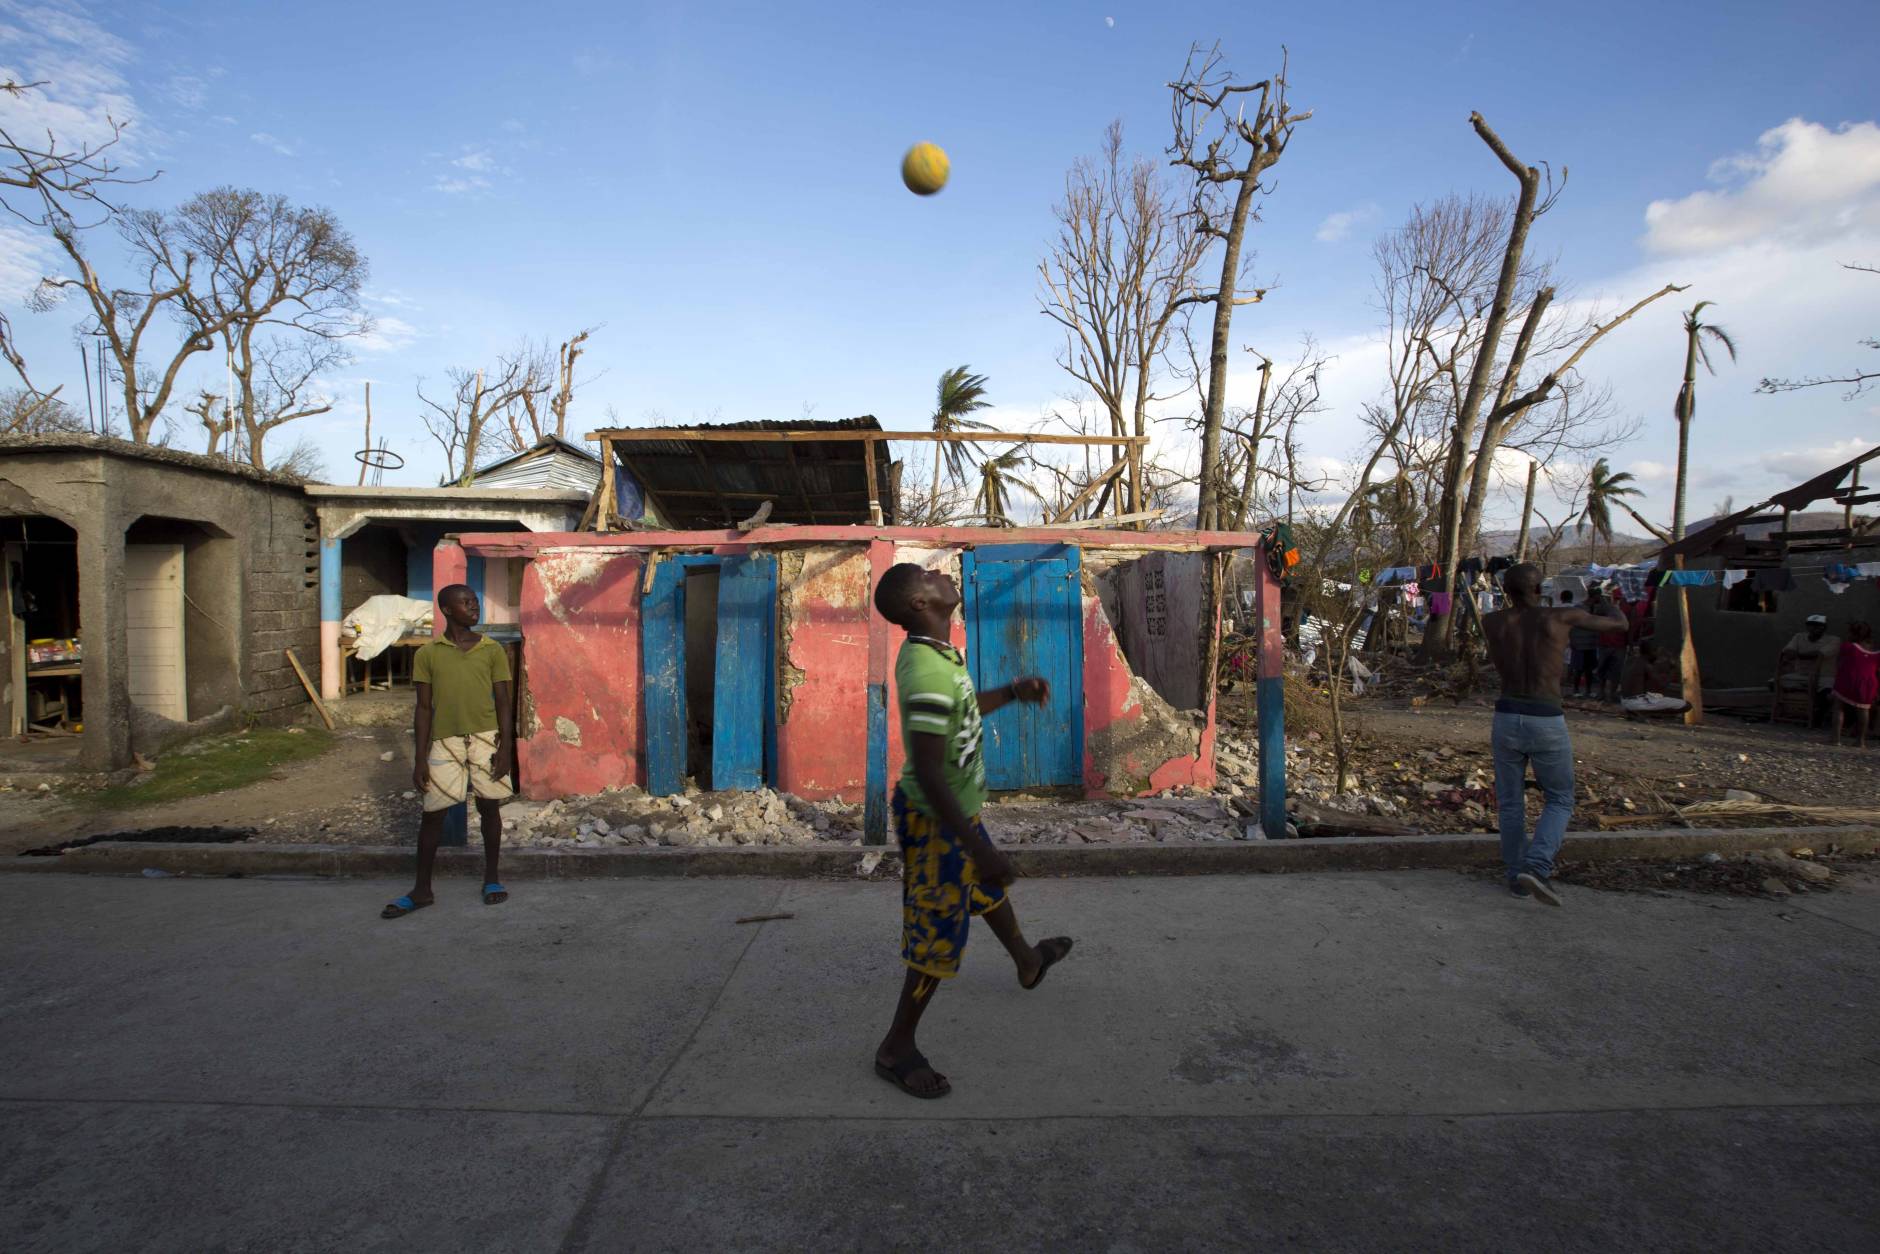 Boys play soccer in front of a house that was destroyed by Hurricane Matthew in Dame-Marie, Haiti, Monday, Oct. 10, 2016. Nearly a week after the storm smashed into southwestern Haiti, some communities along the southern coast have yet to receive any assistance, leaving residents who have lost their homes and virtually all of their belongings struggling to find shelter and potable water. (AP Photo/Dieu Nalio Chery)